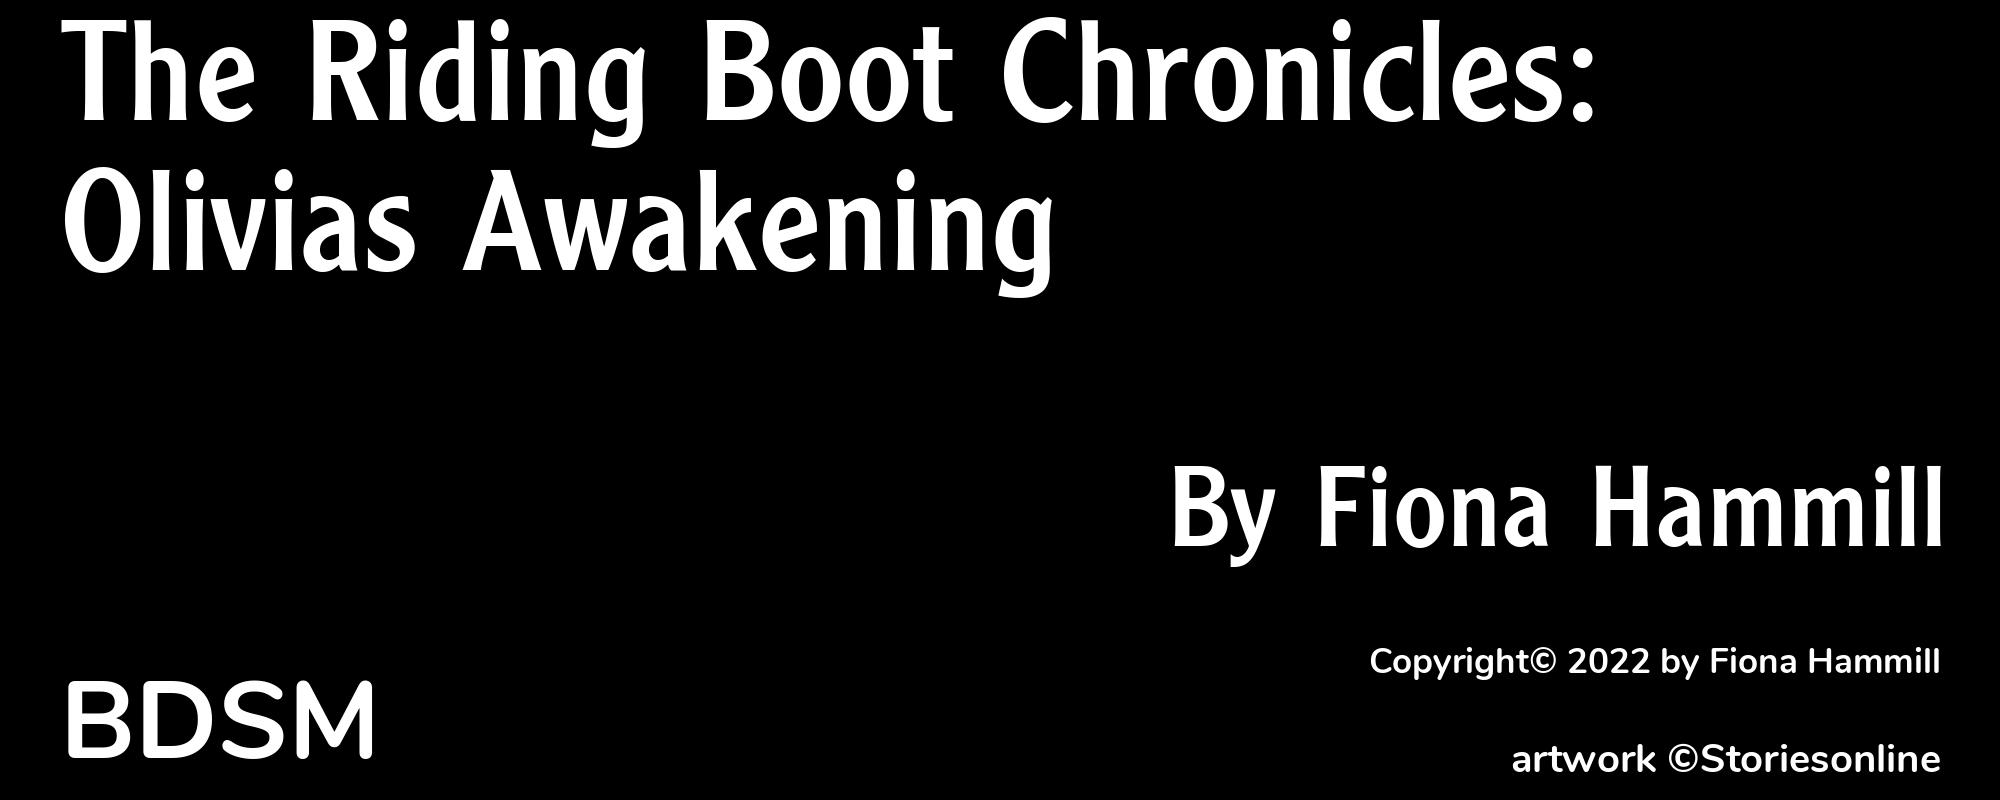 The Riding Boot Chronicles: Olivias Awakening - Cover